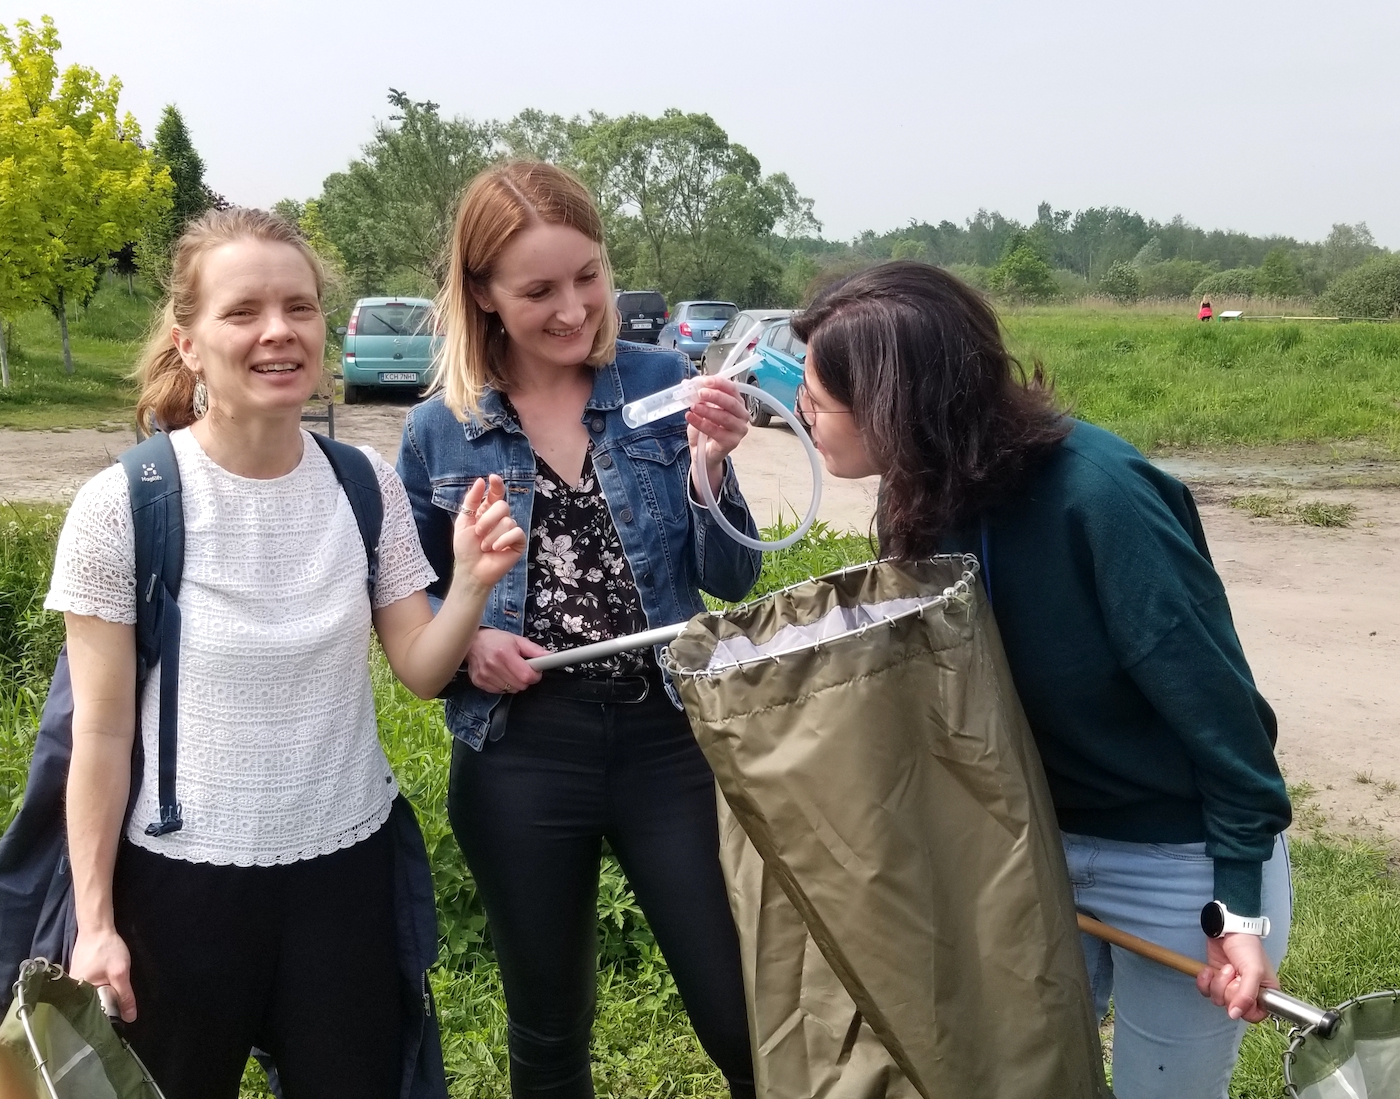 Anne, Anna, and Camila have caught some planthoppers!